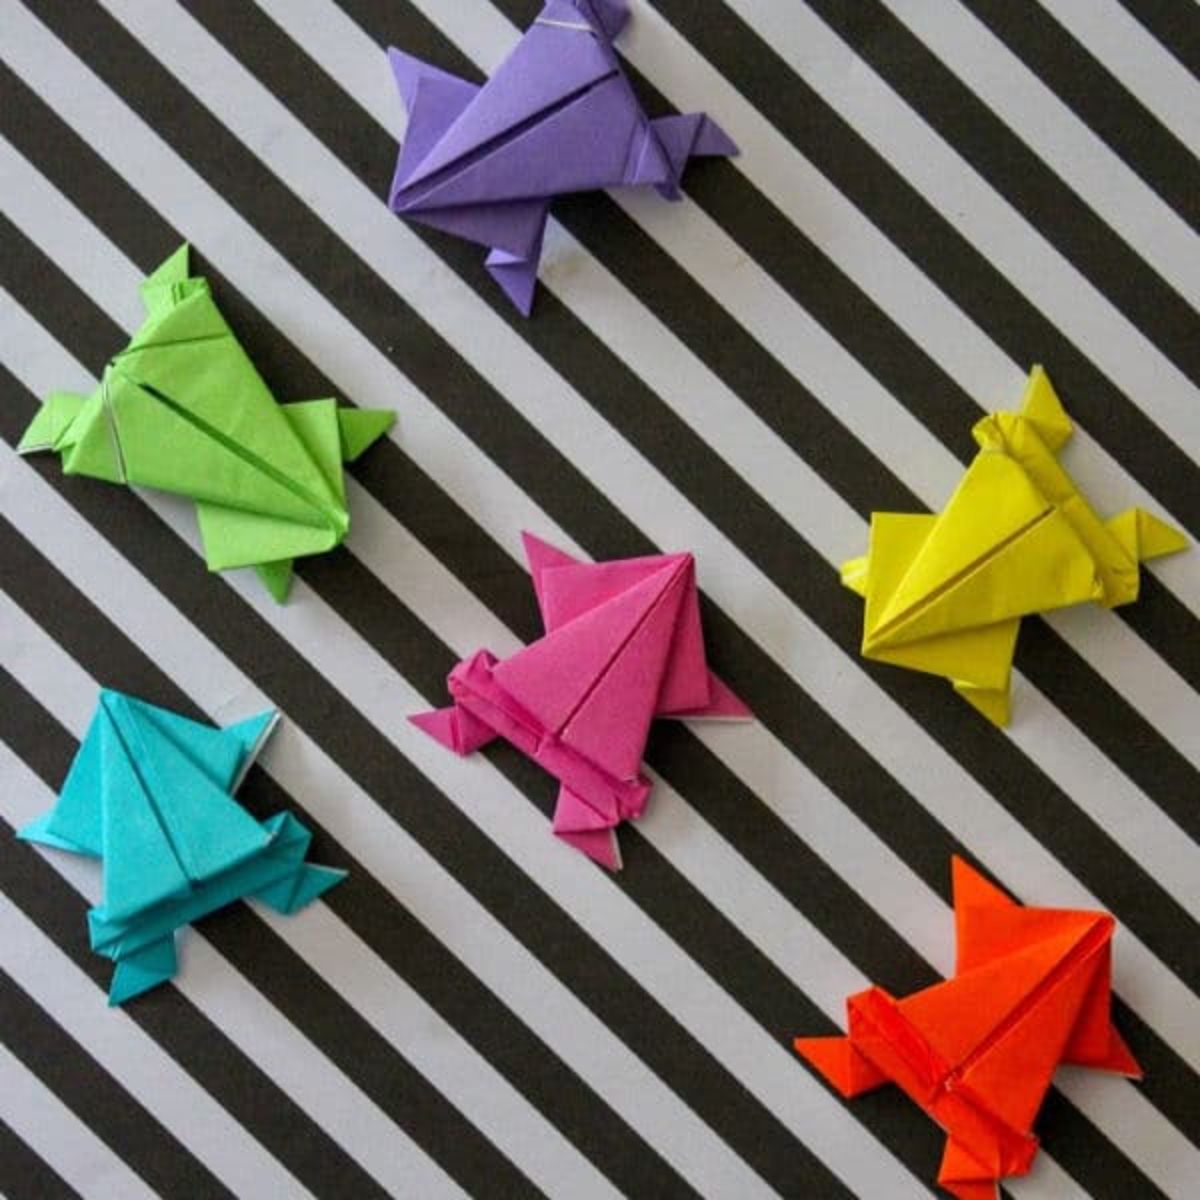 multi-colored origami frogs on a black and white striped background.